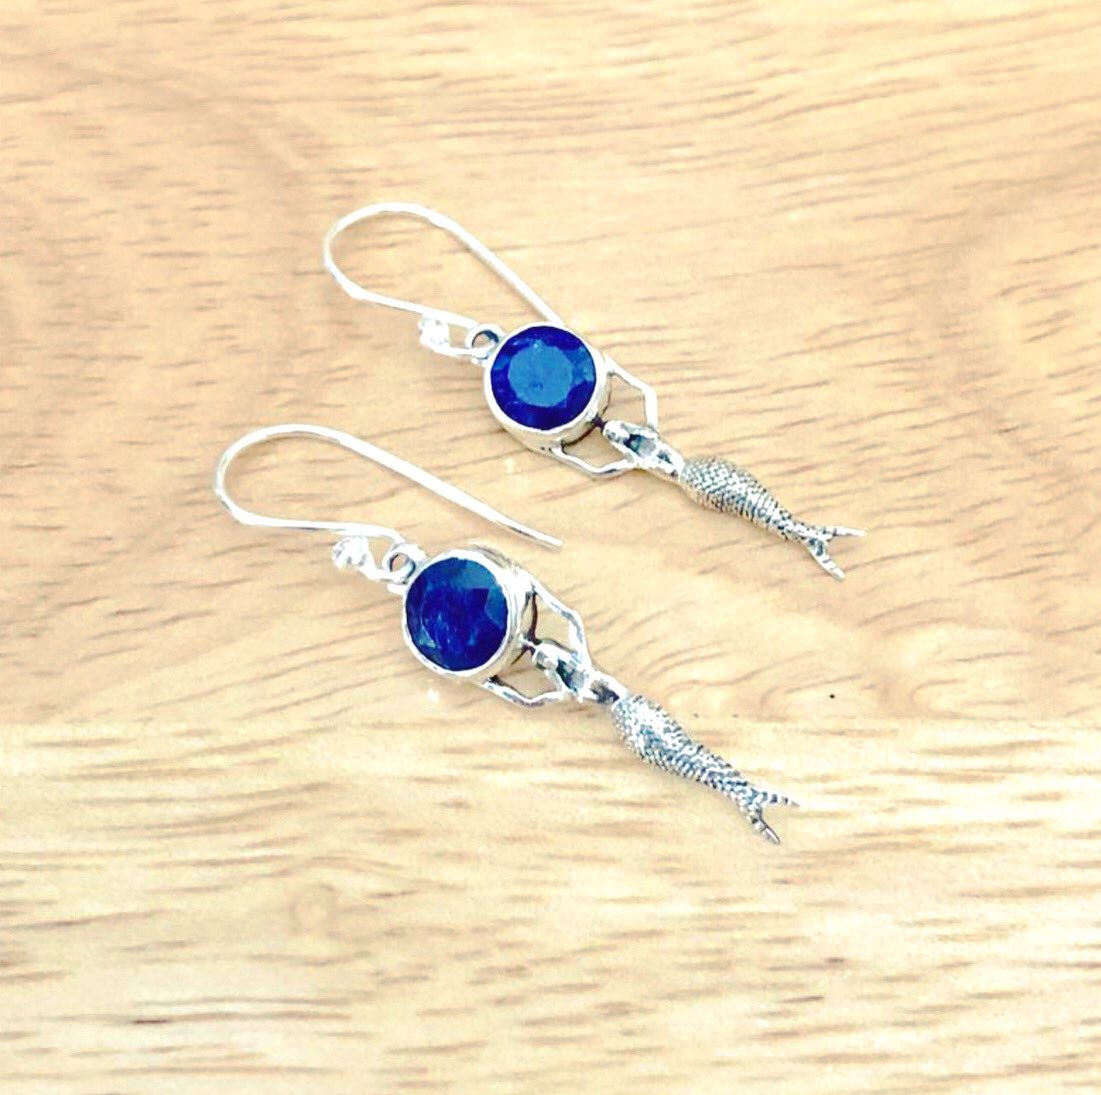 What is better than tiny mermaids? These are so sweet! Sterling silver and natural Sapphire gemstone earrings! etsy.me/37EwFVW 
#sapphire #septemberbirthstone #mermaid #mermaidart #mermaidjewelry #mermaidlife #sterlingsilverjewelry #sterlingsilver #fantasyjewelry #sea